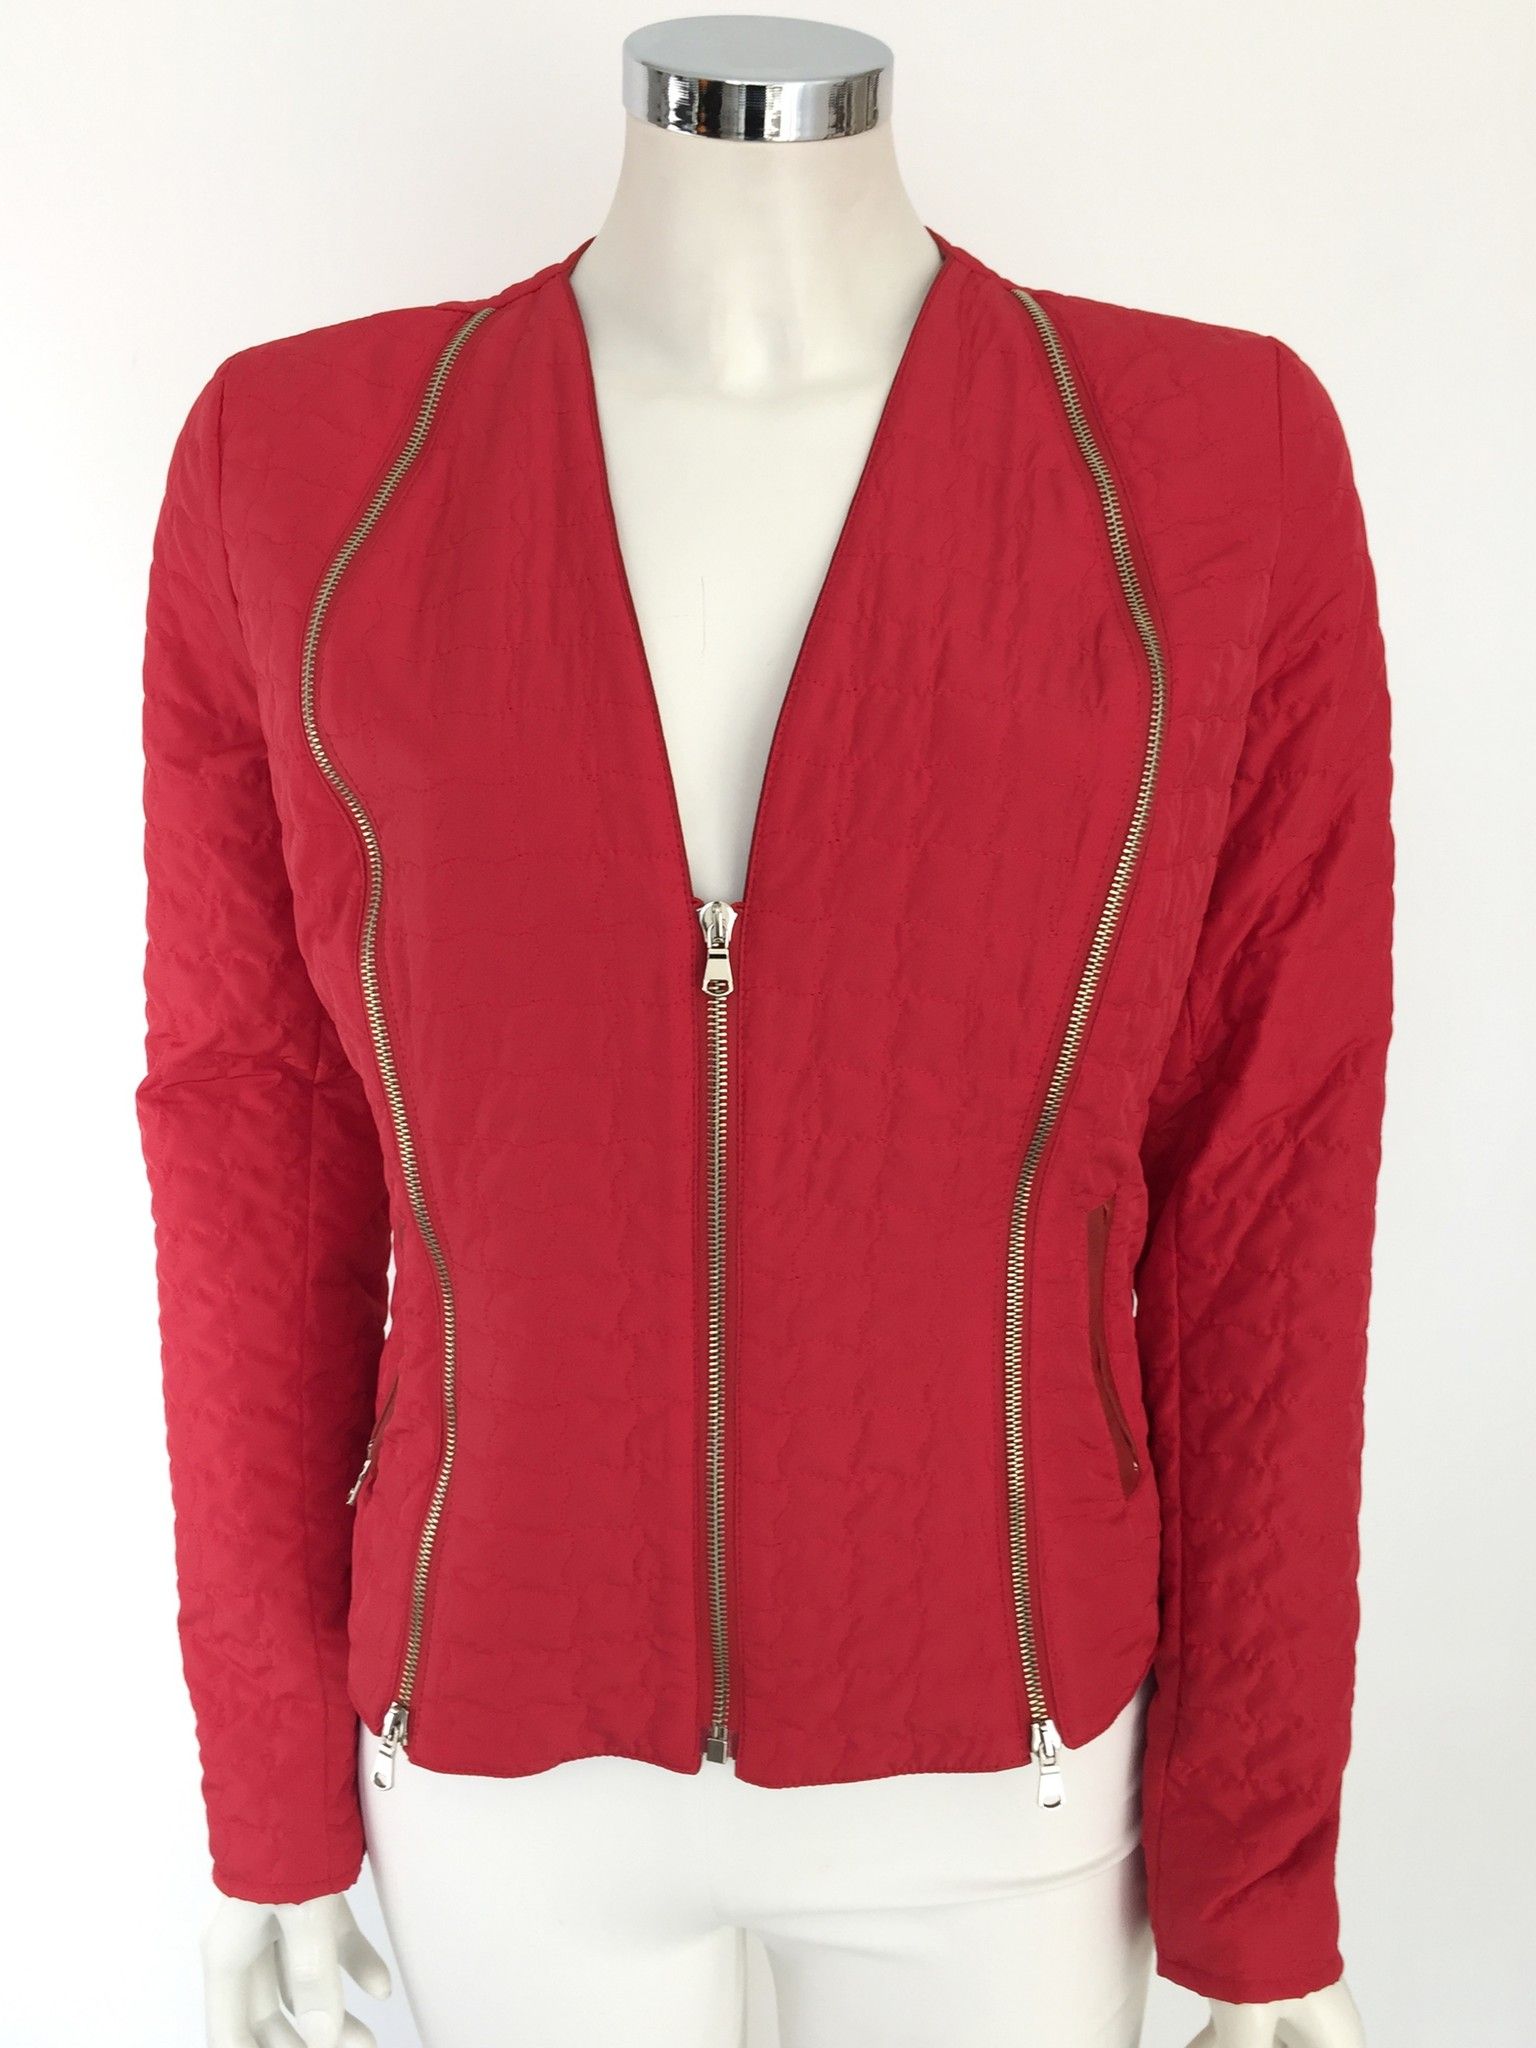 Adele Fado Quilted Jacket with Zippers Cod.CP116